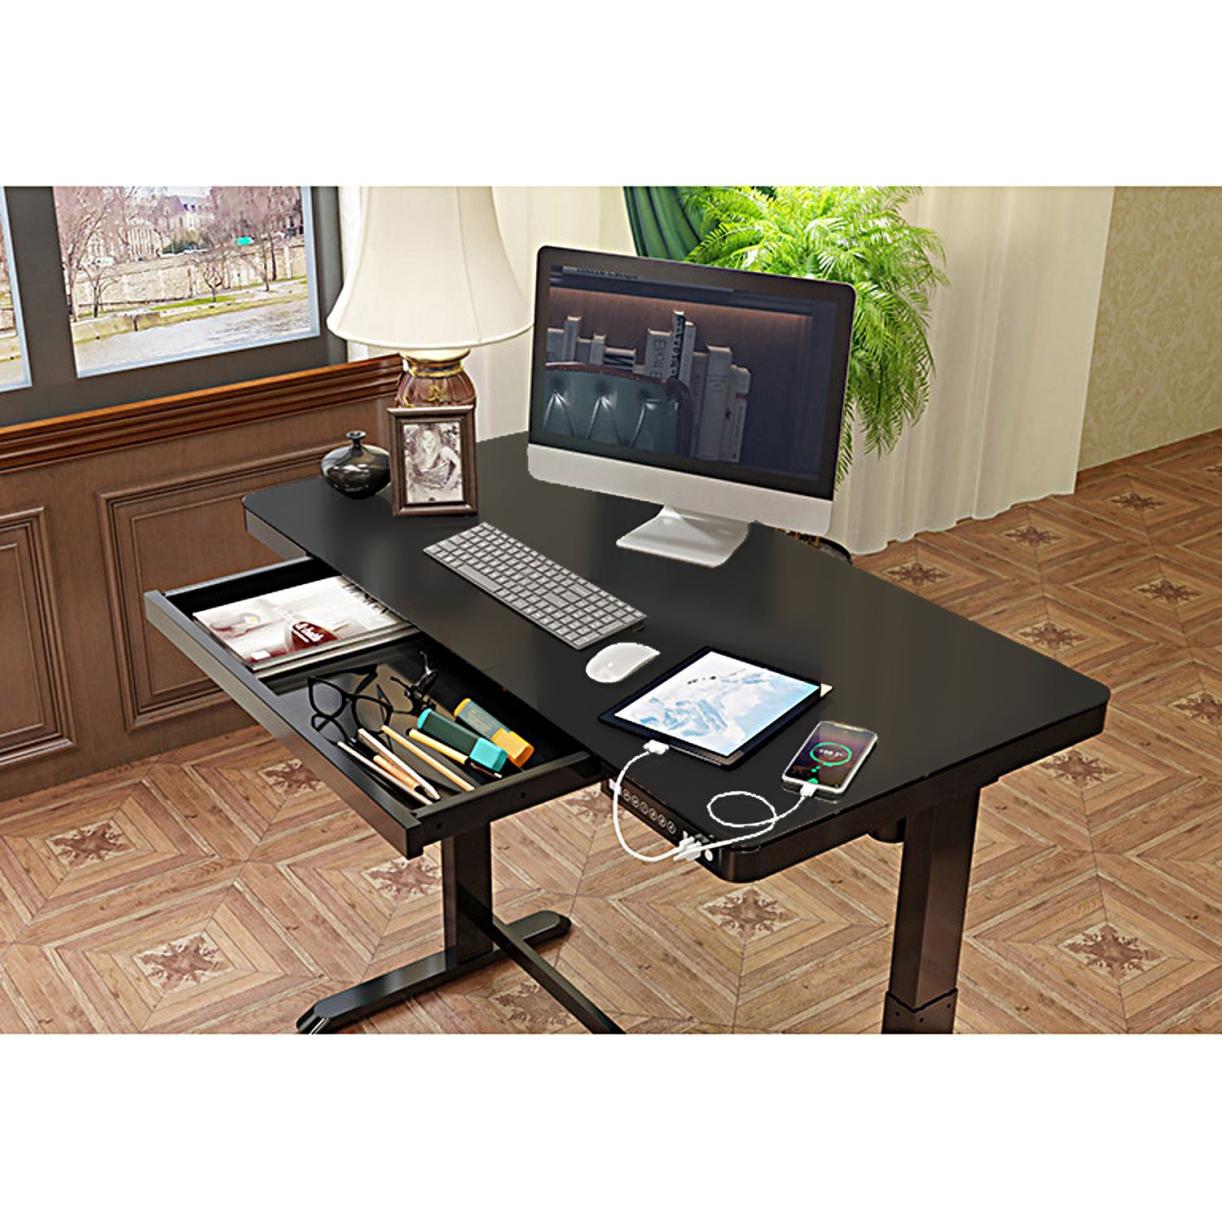 How Can I Choose the Right Electric Height Adjustable Desk for My Needs and Budget?